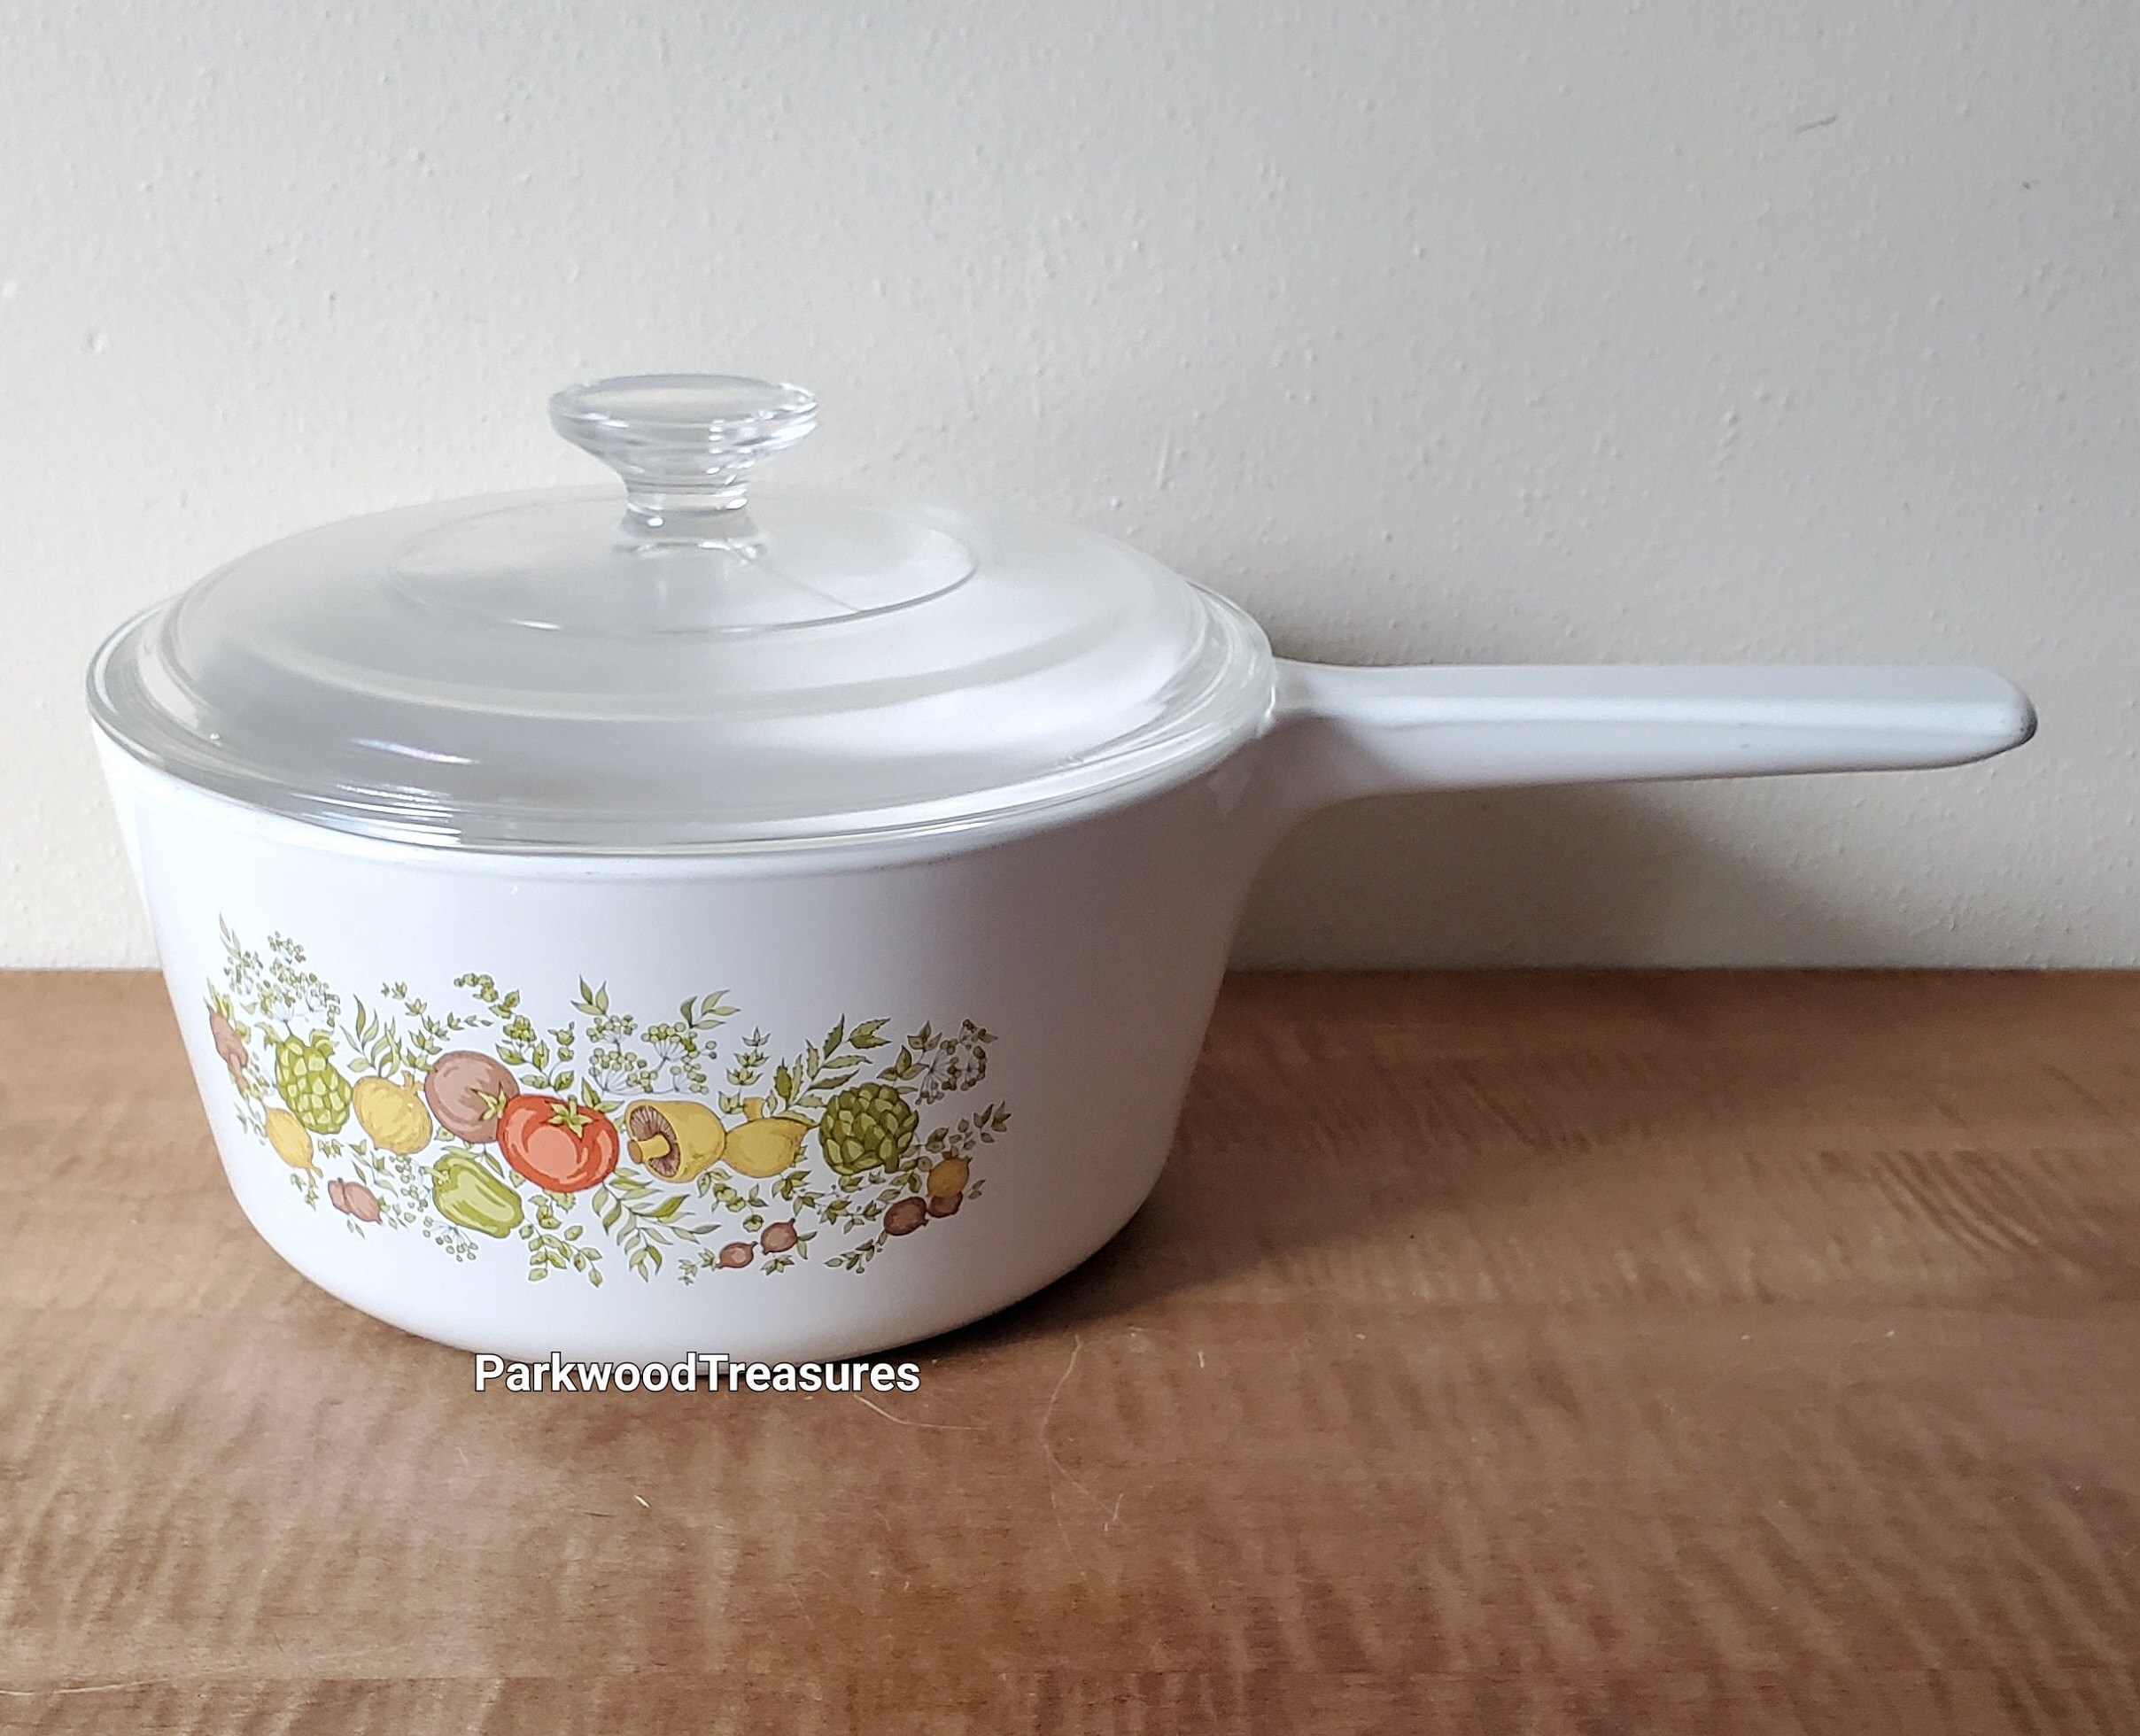 Vintage Corning Rangetopper 2 1/2 Quart Saucepan with Glass Lid in Spice of  Life